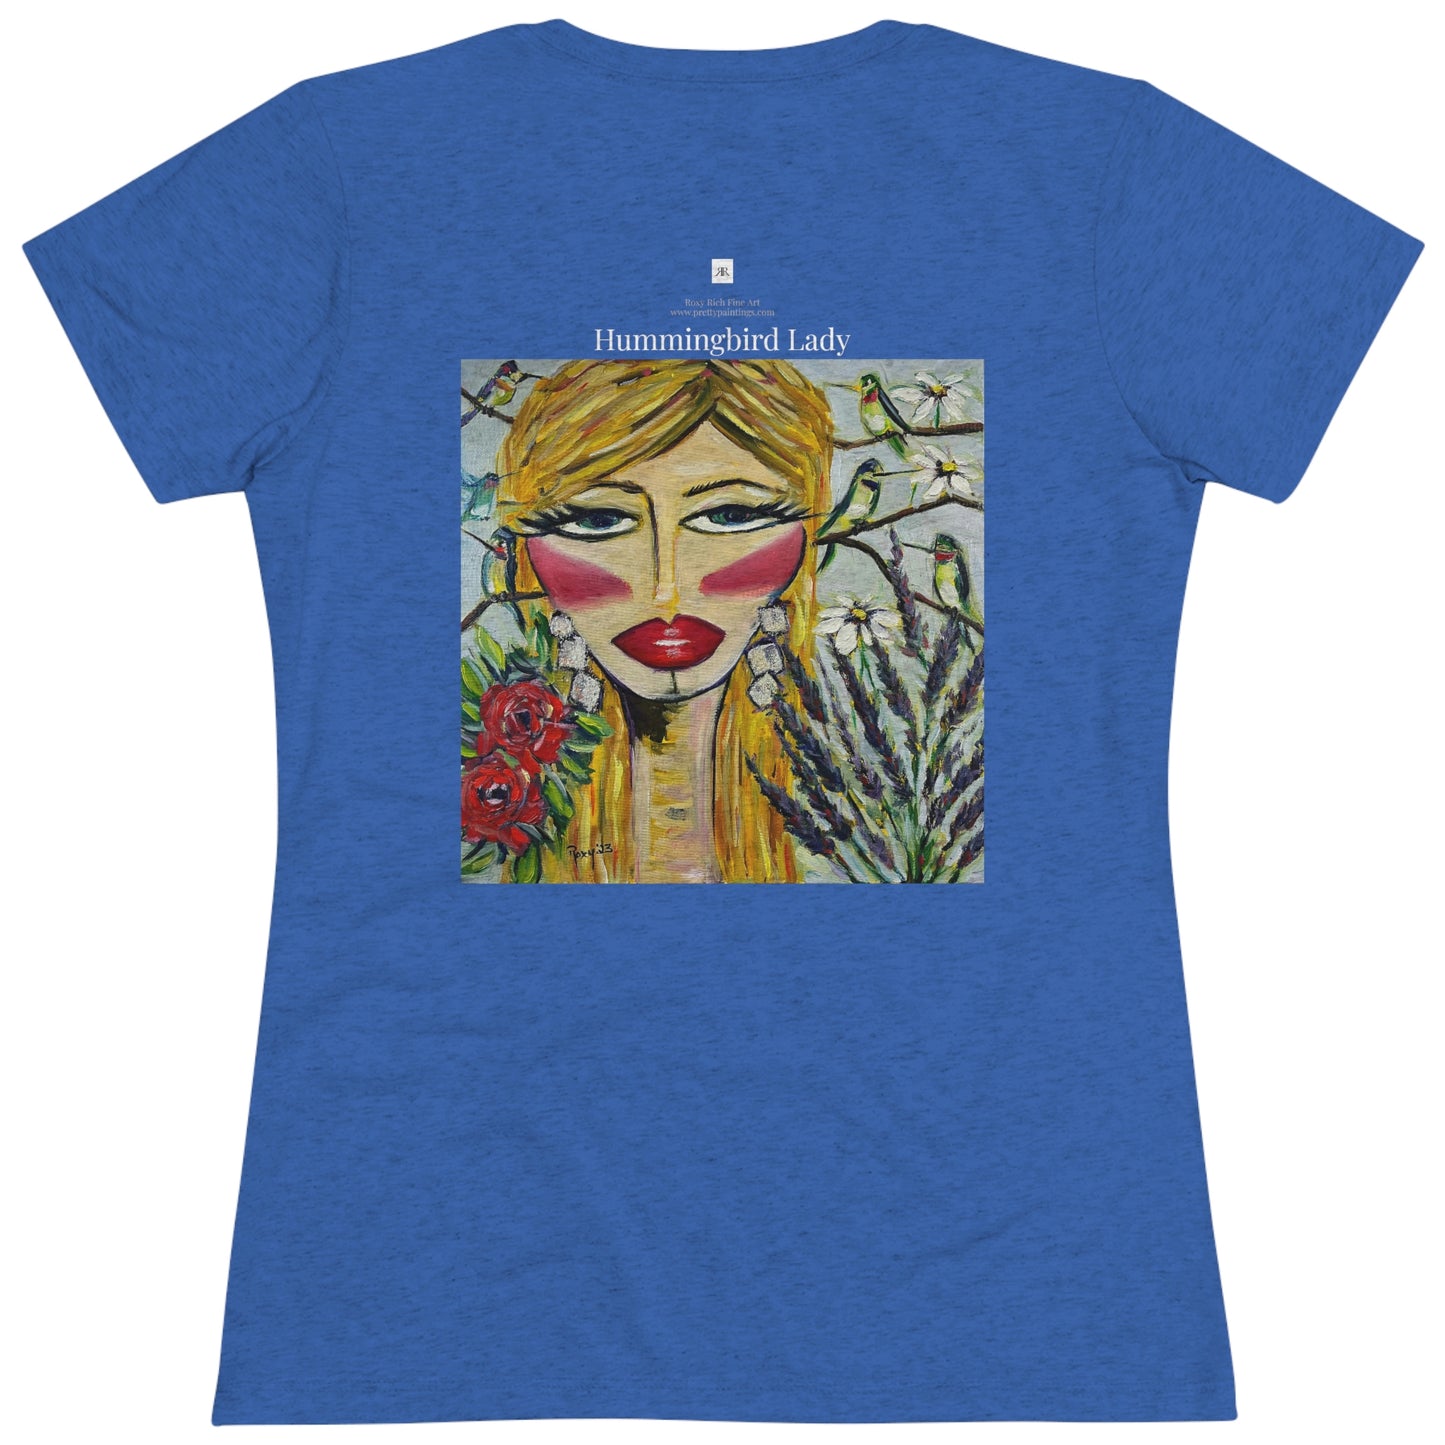 Hummingbird Lady (design on back) Women's fitted Triblend Tee  tee shirt